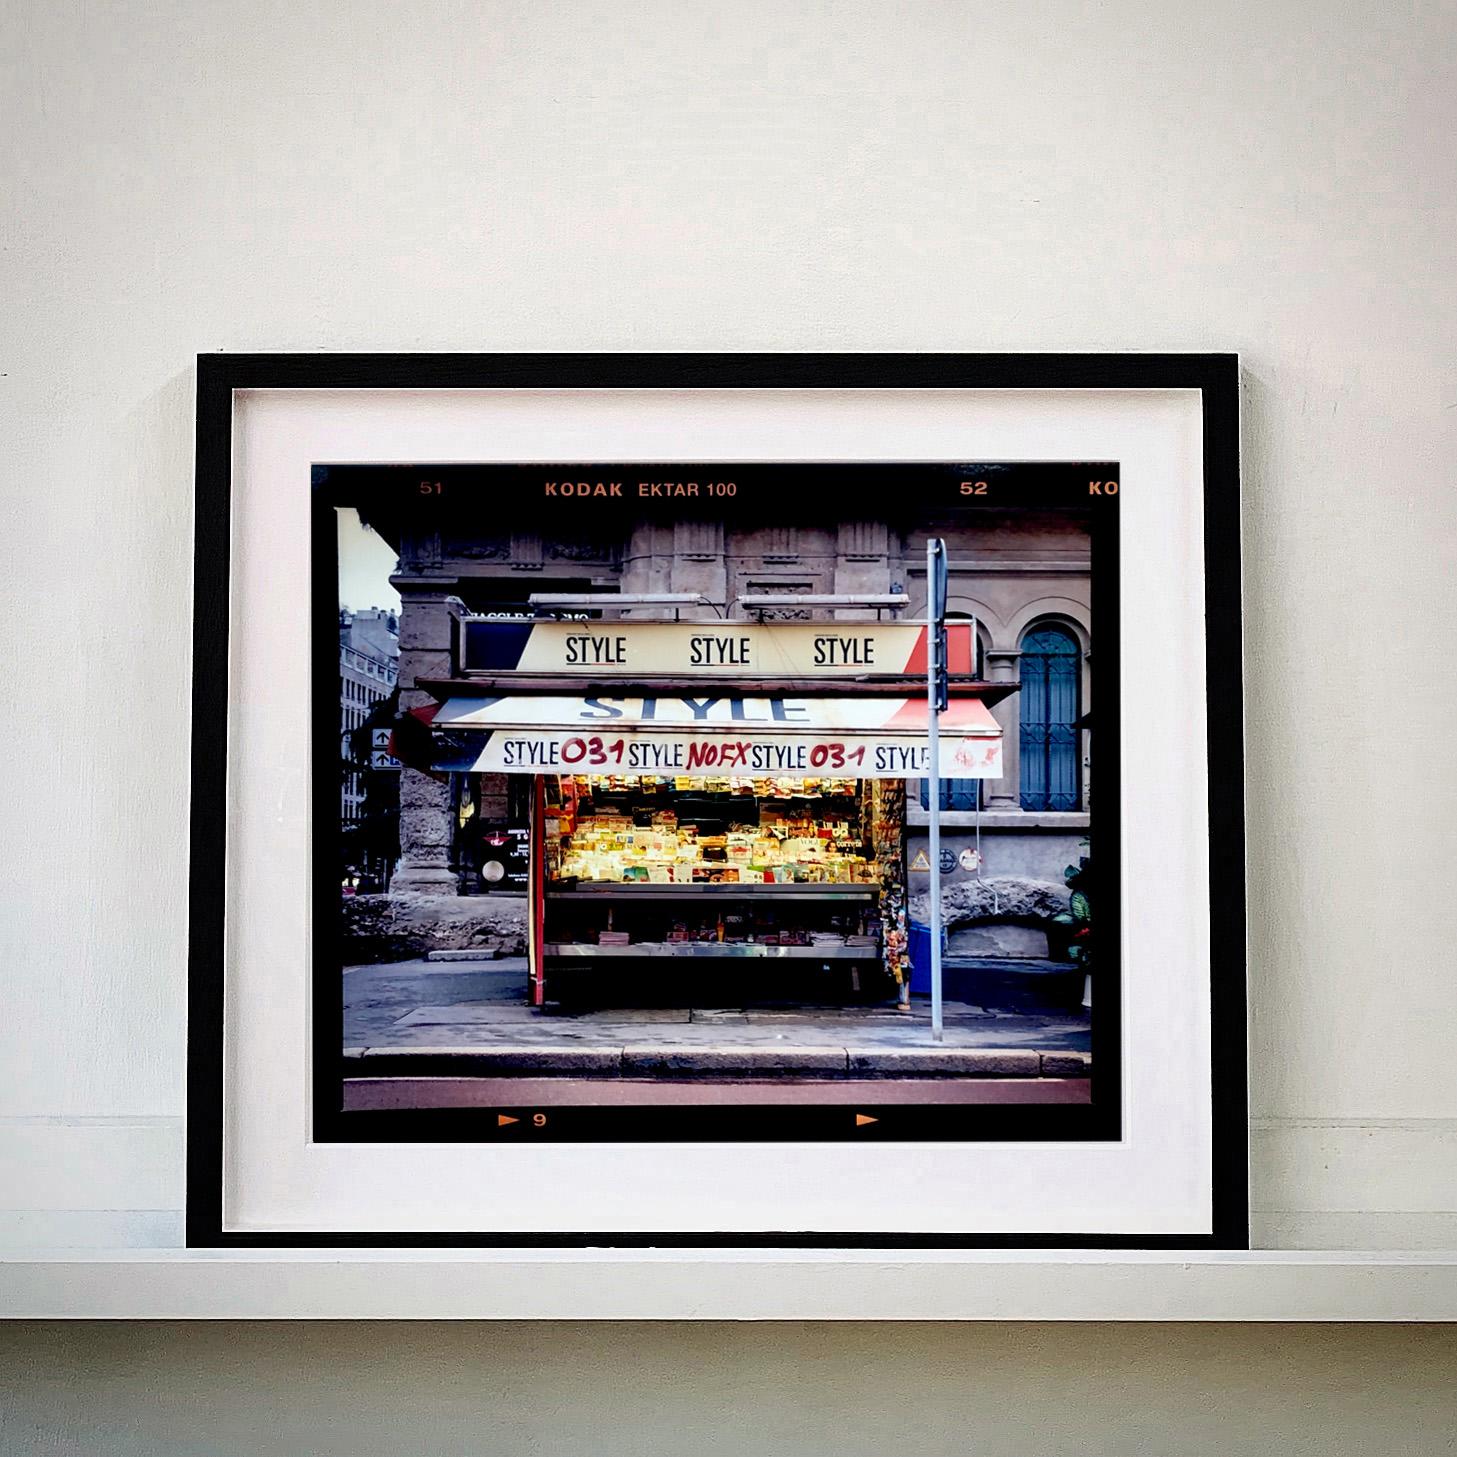 News Stand, from Richard Heeps series, 'A Short History of Milan' which began in November 2018 for a special project featuring at the Affordable Art Fair Milan 2019 and the series is ongoing.
There is a reoccurring linear, structural theme